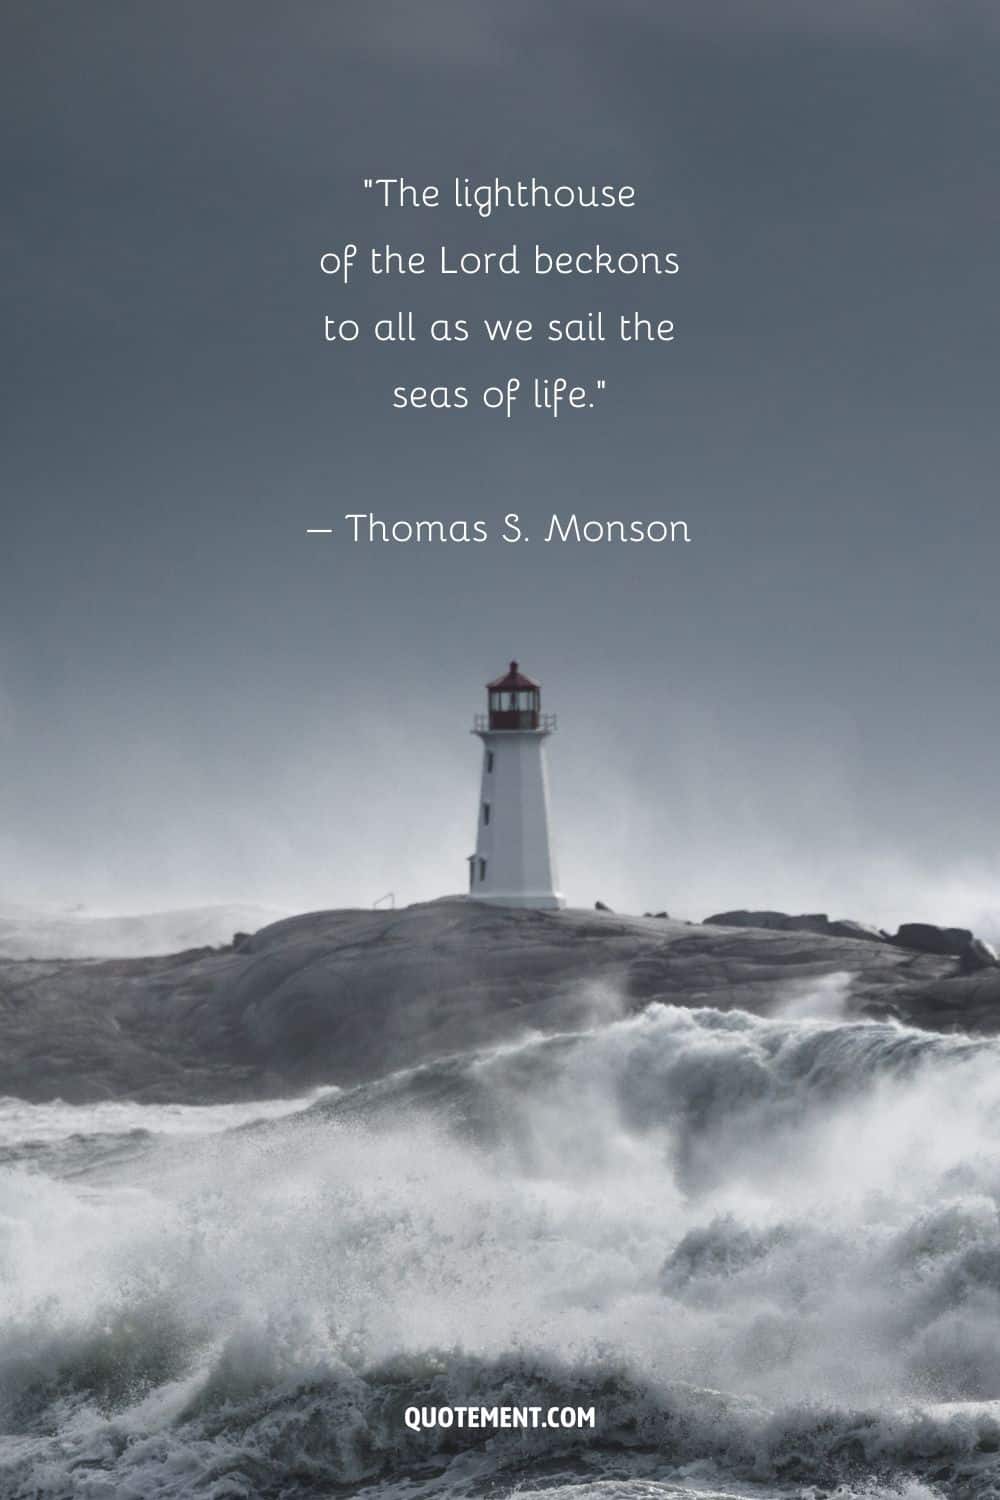 Fascinating quote by Thomas S. Monson and a lighthouse in the background